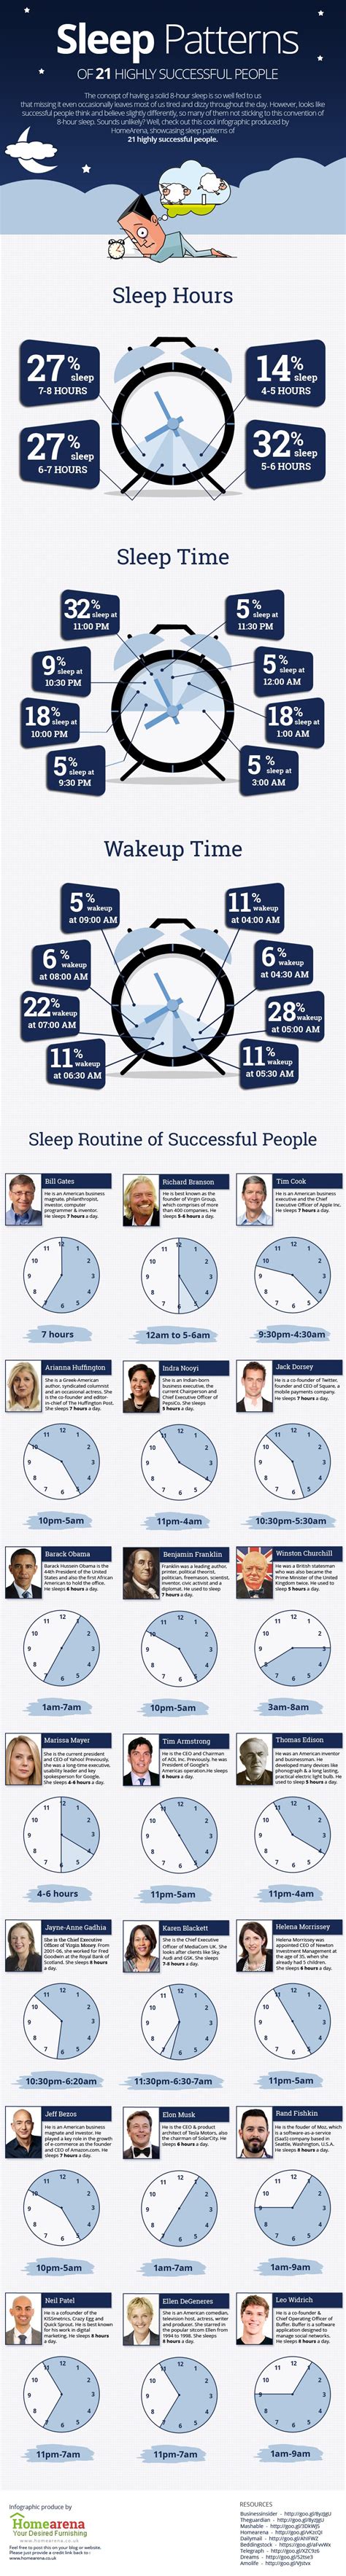 Unusual Sleep Patterns Of 21 Highly Successful People Infographic